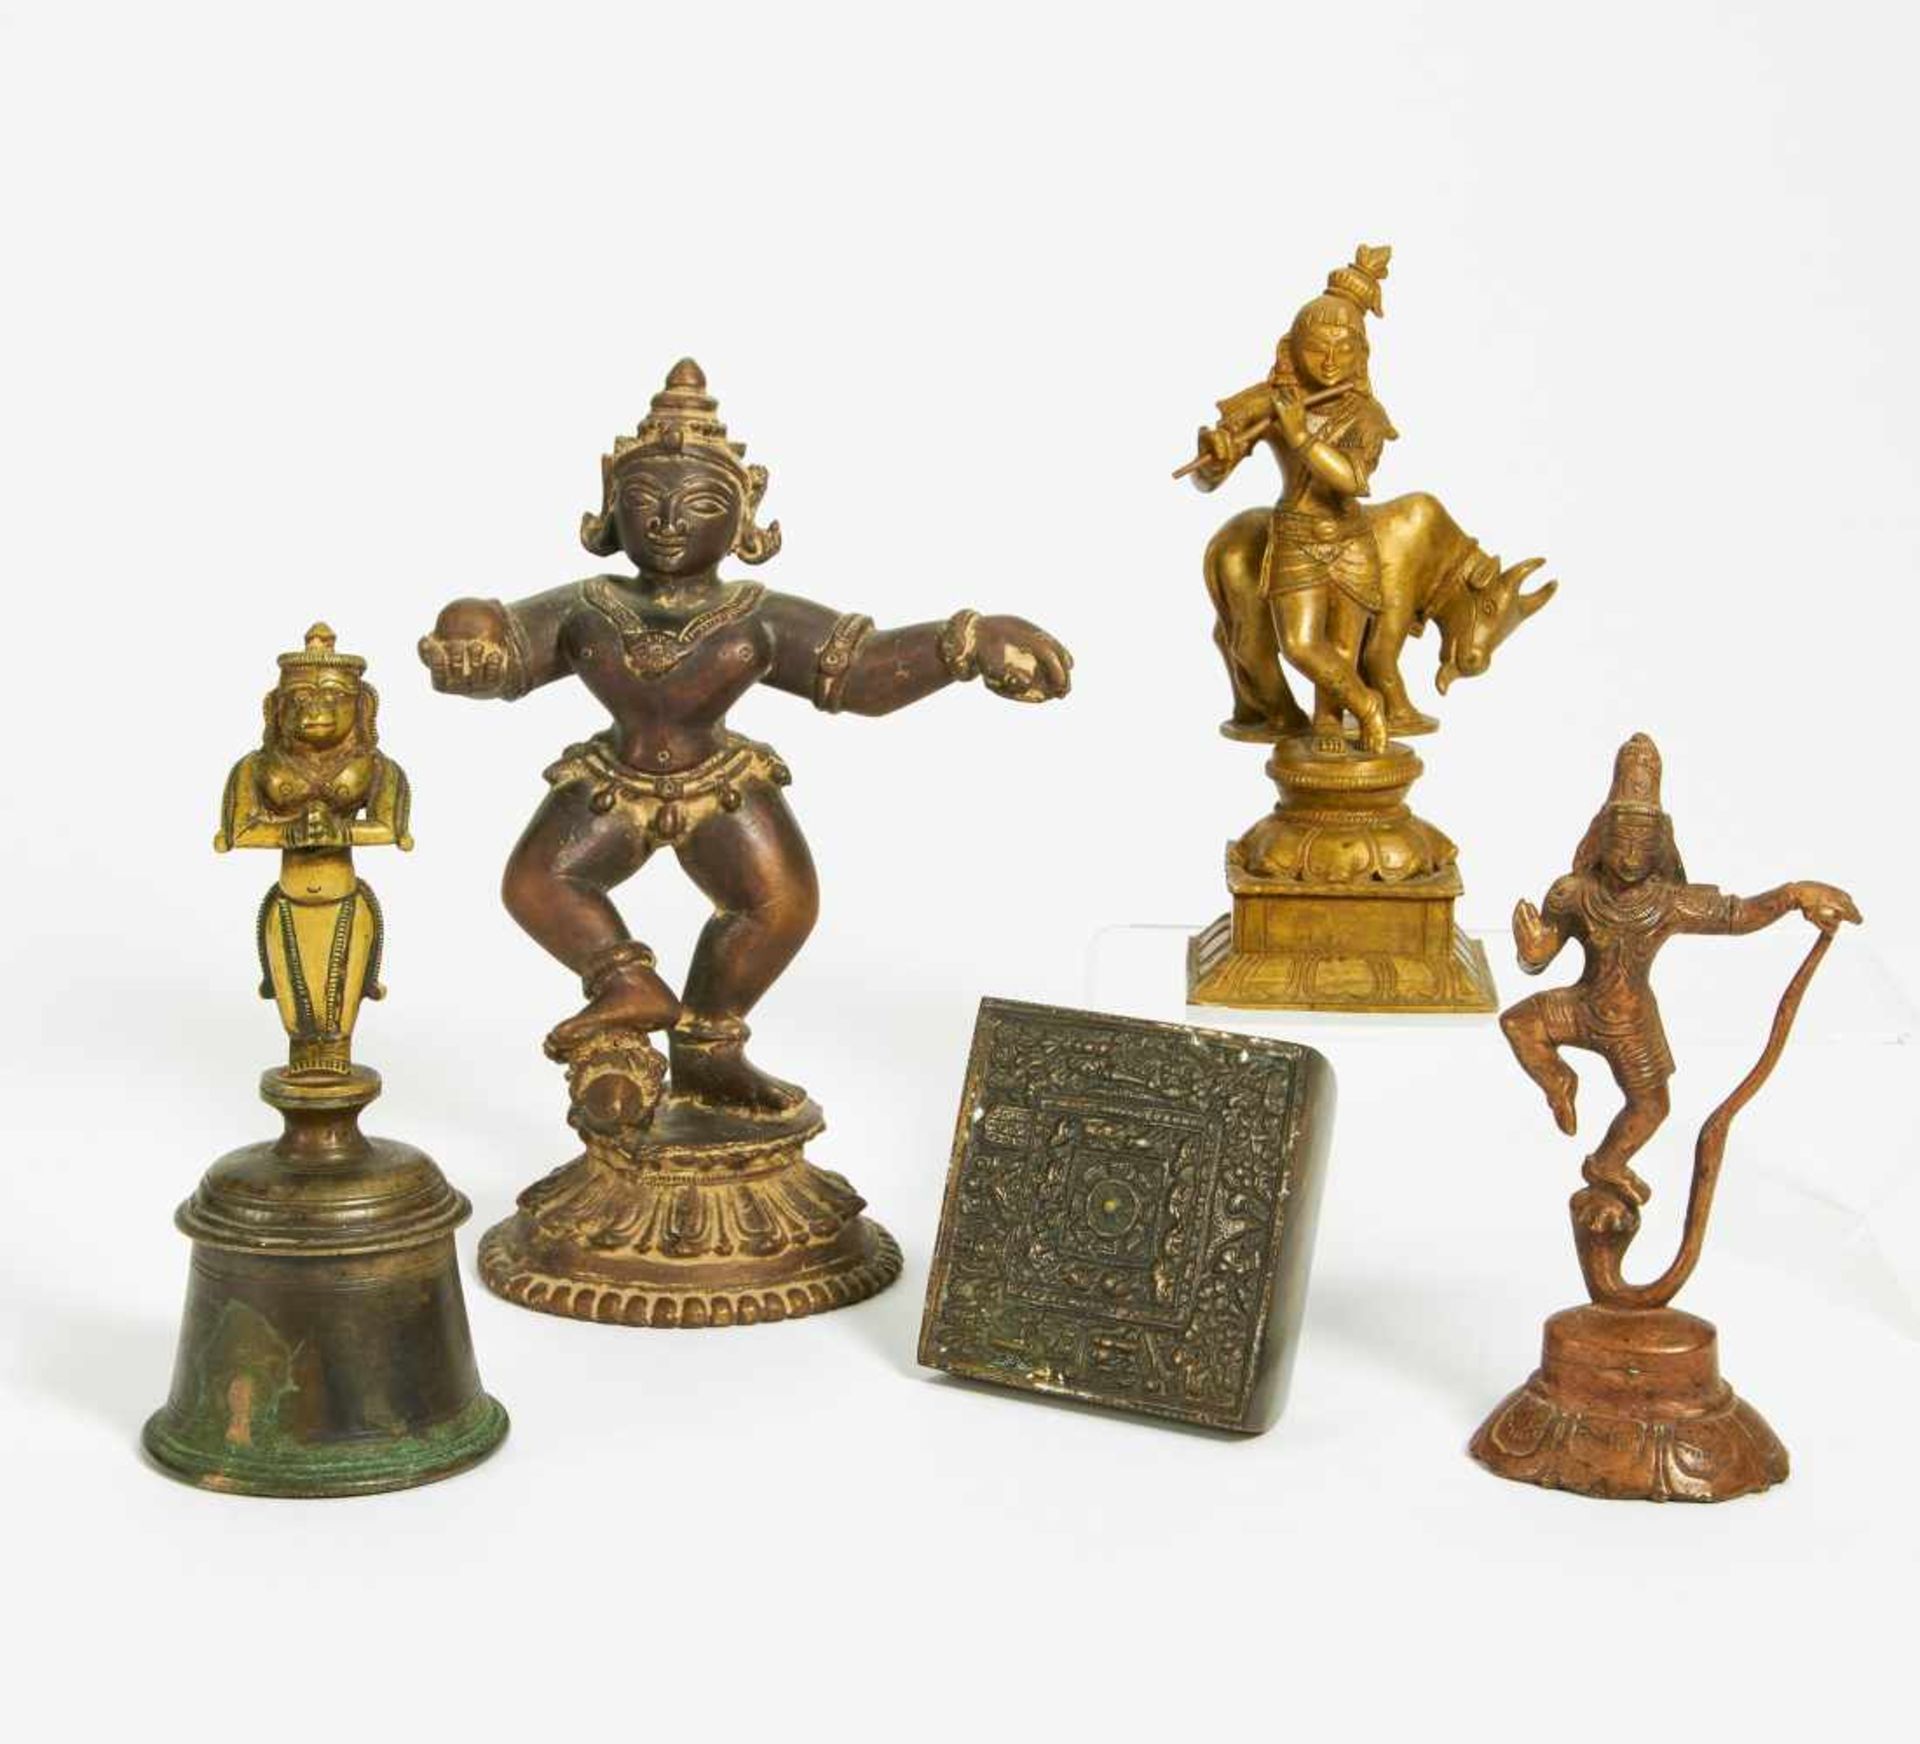 THREE FIGURES OF DEITIES, ONE BELL WITH HANUMAN AND ONE MANDALA. India. 19th/20th c. Bronze. H.15.